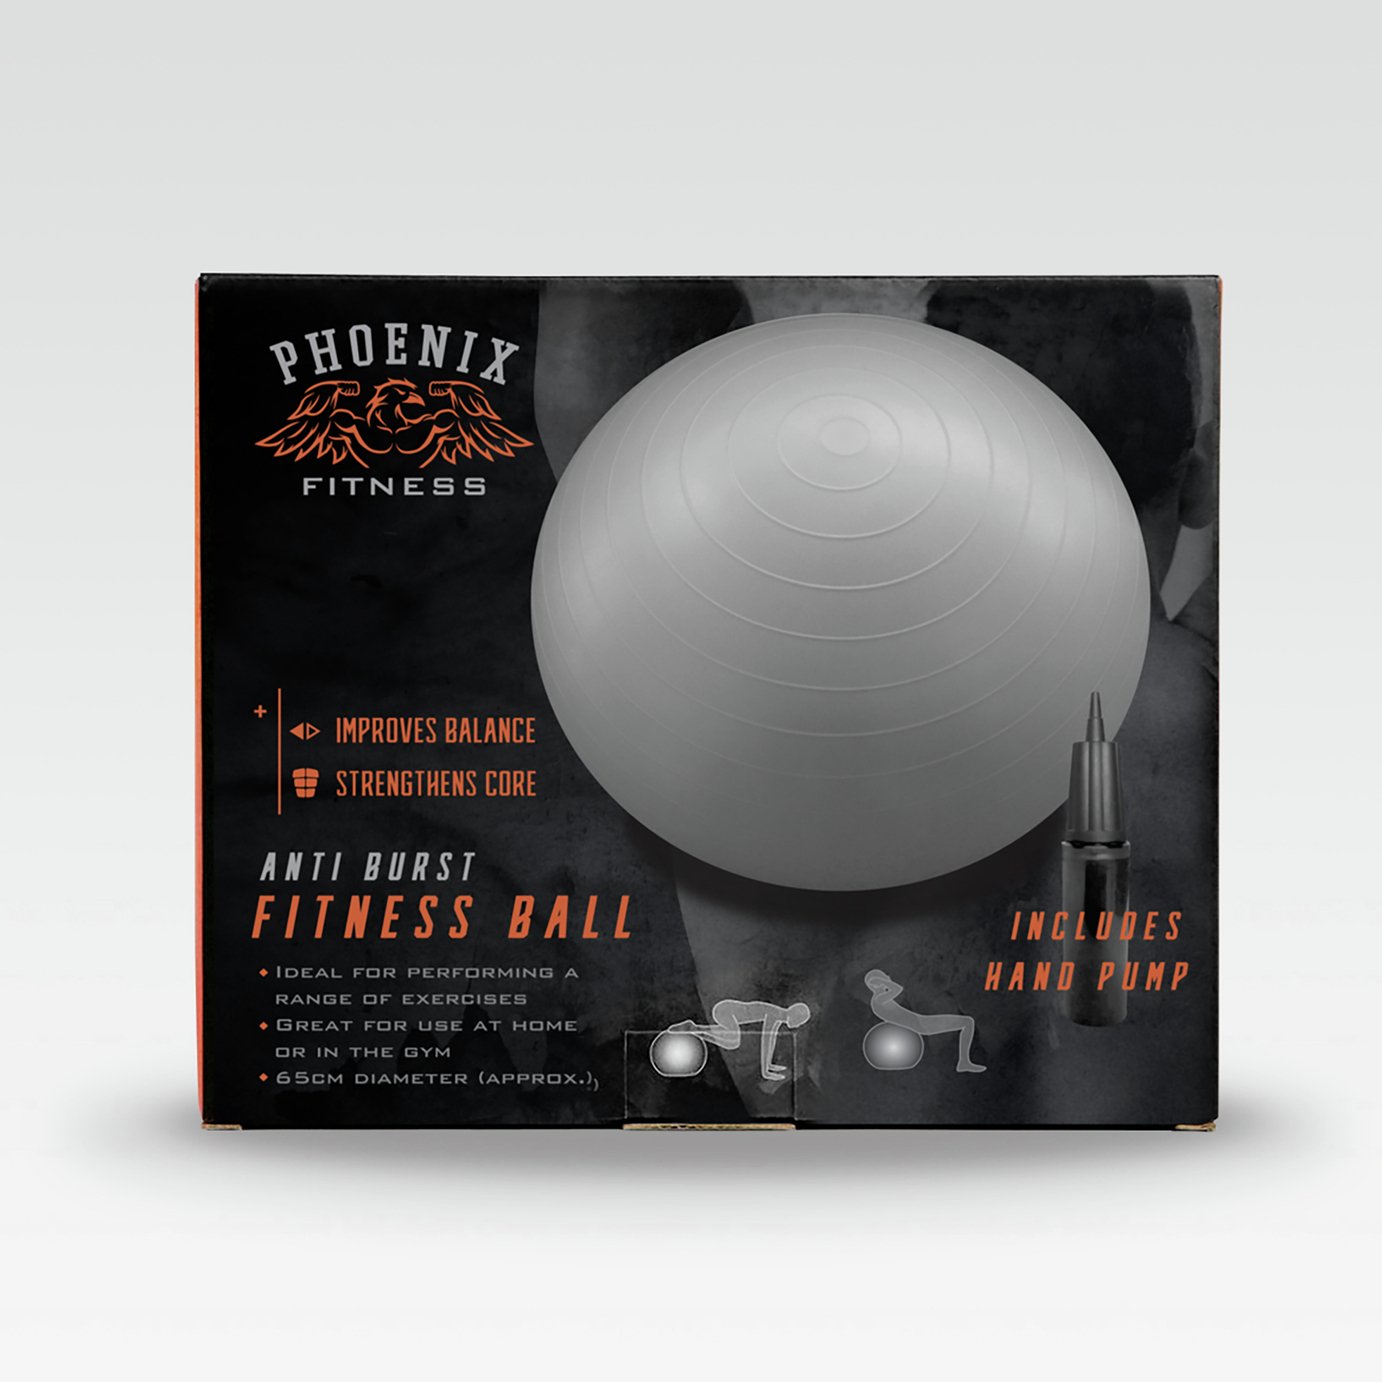 Phoenix Fitness 65cm Gym Ball With Pump Review